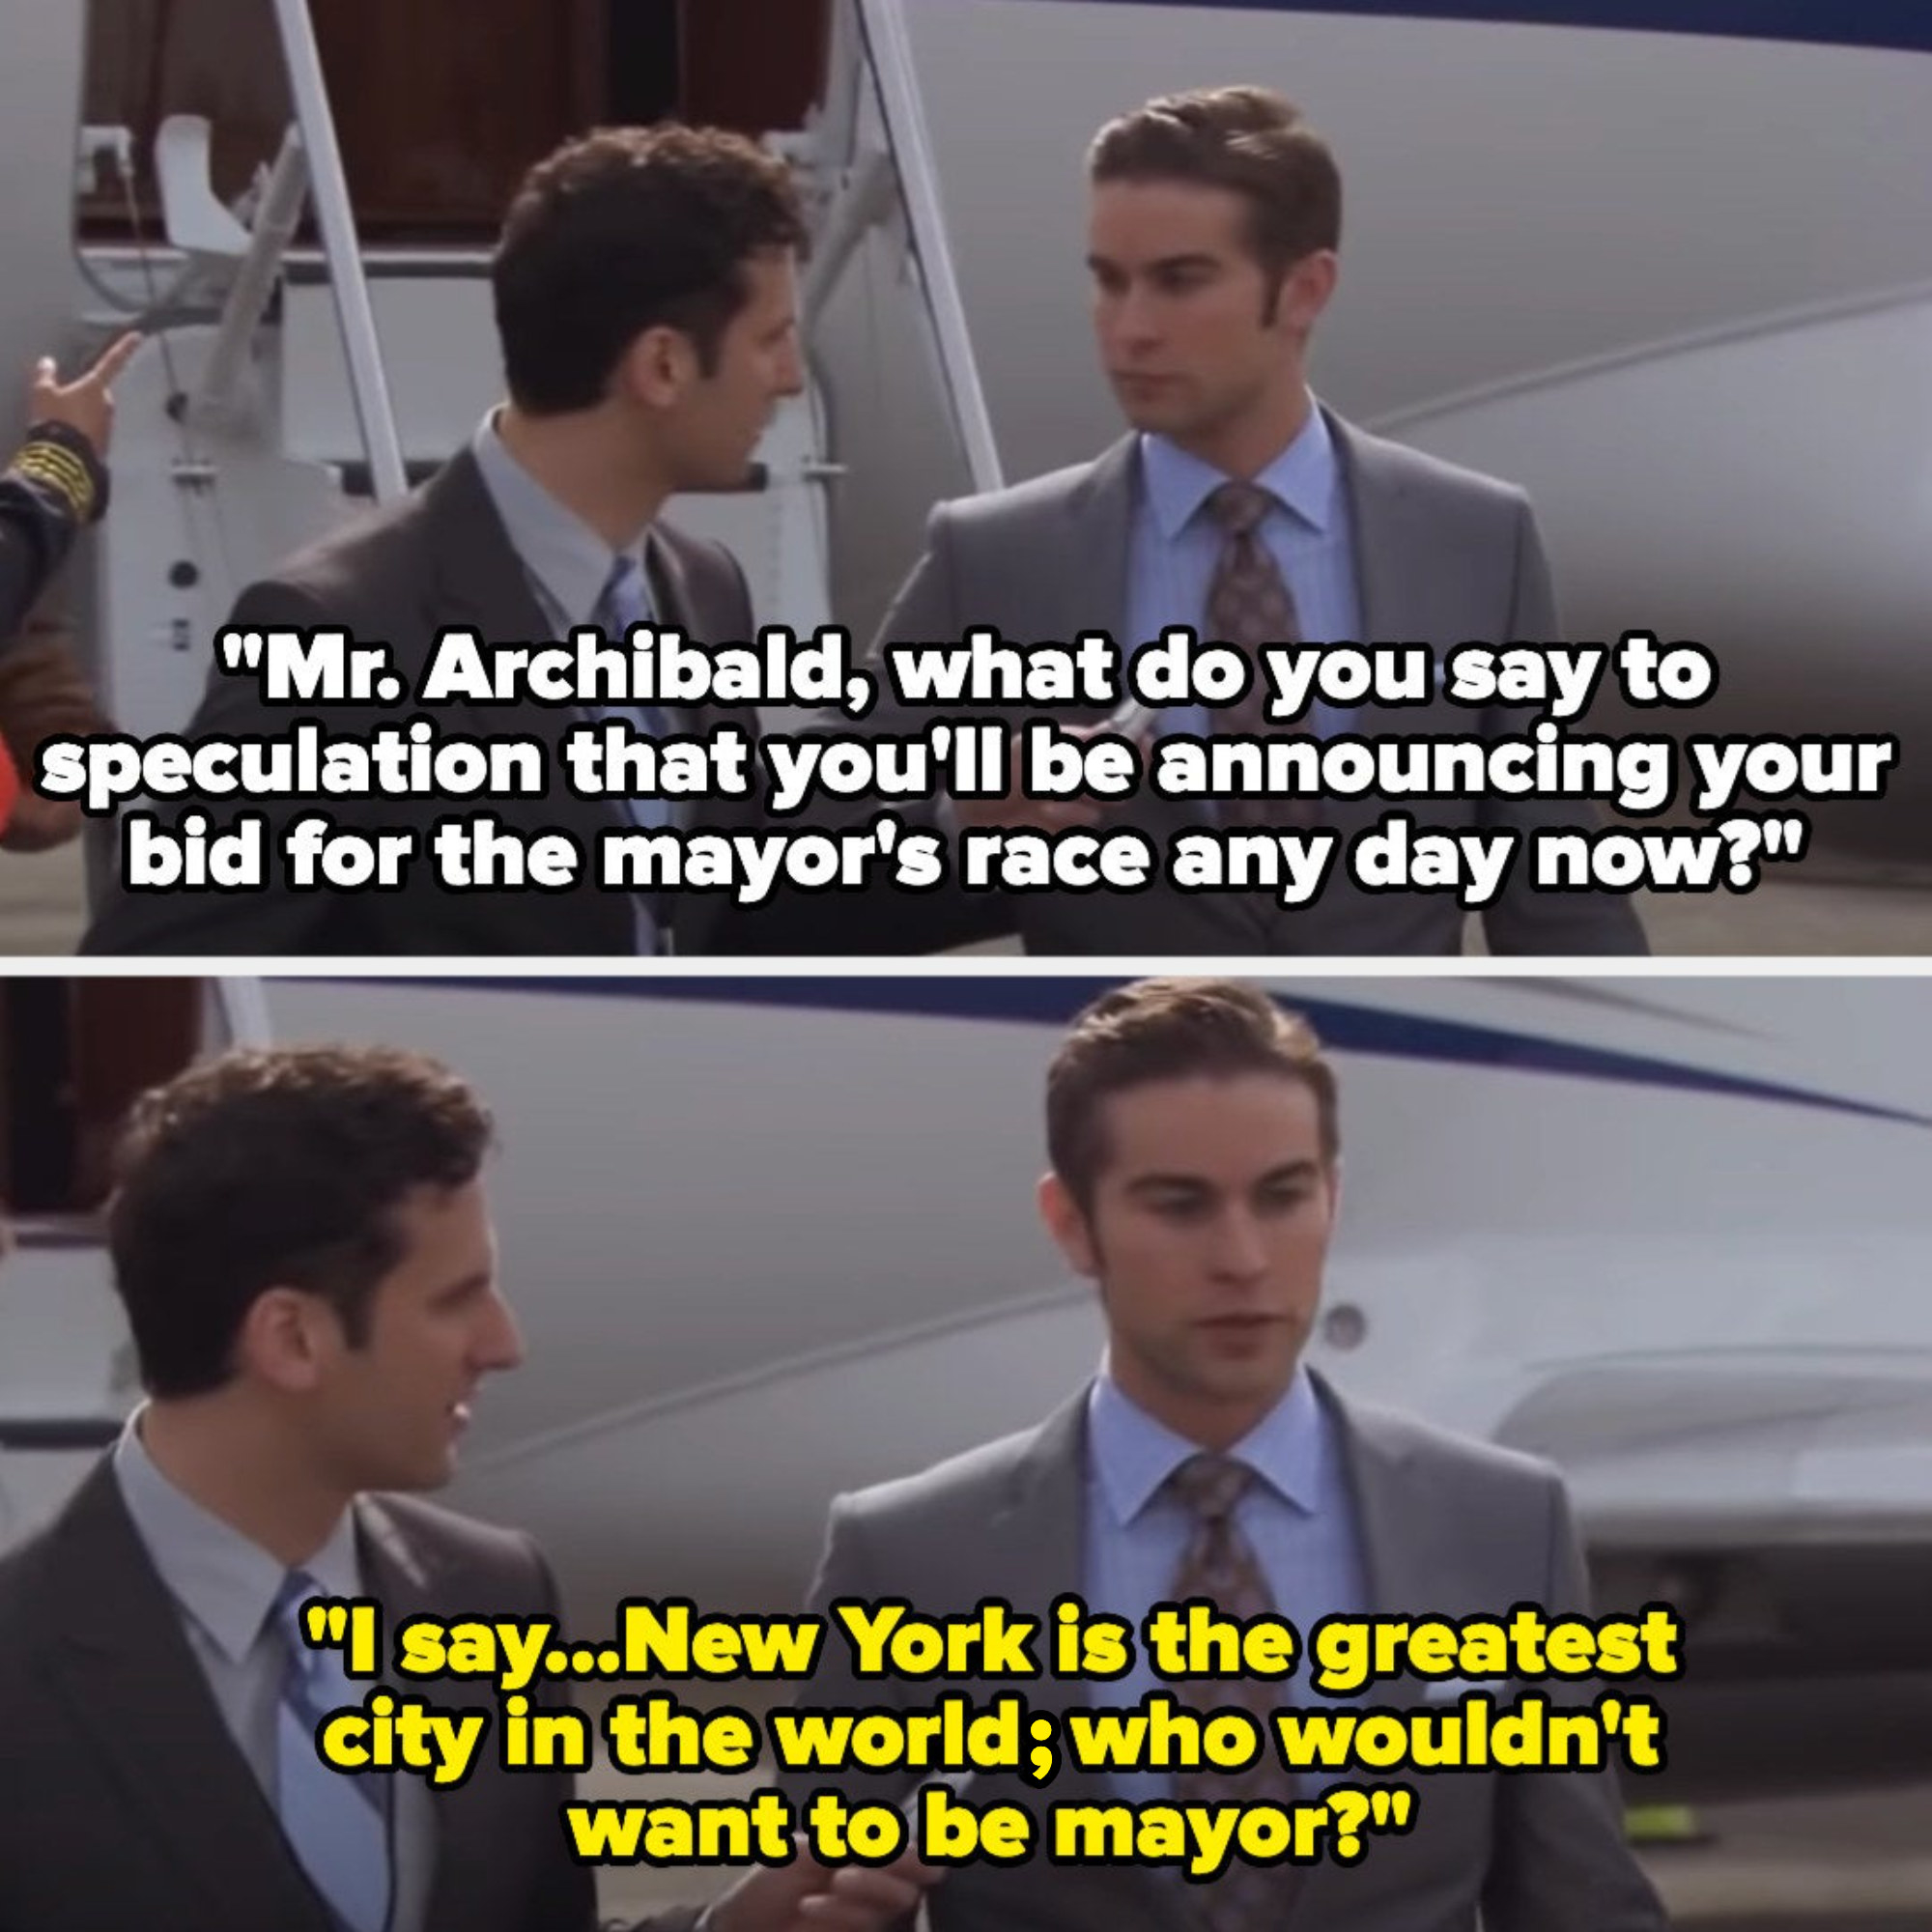 A reporter asks Nate if he&#x27;s running for mayor, and Nate avoids the question by saying NY is the greatest city in the world and who wouldn&#x27;t want to be mayor